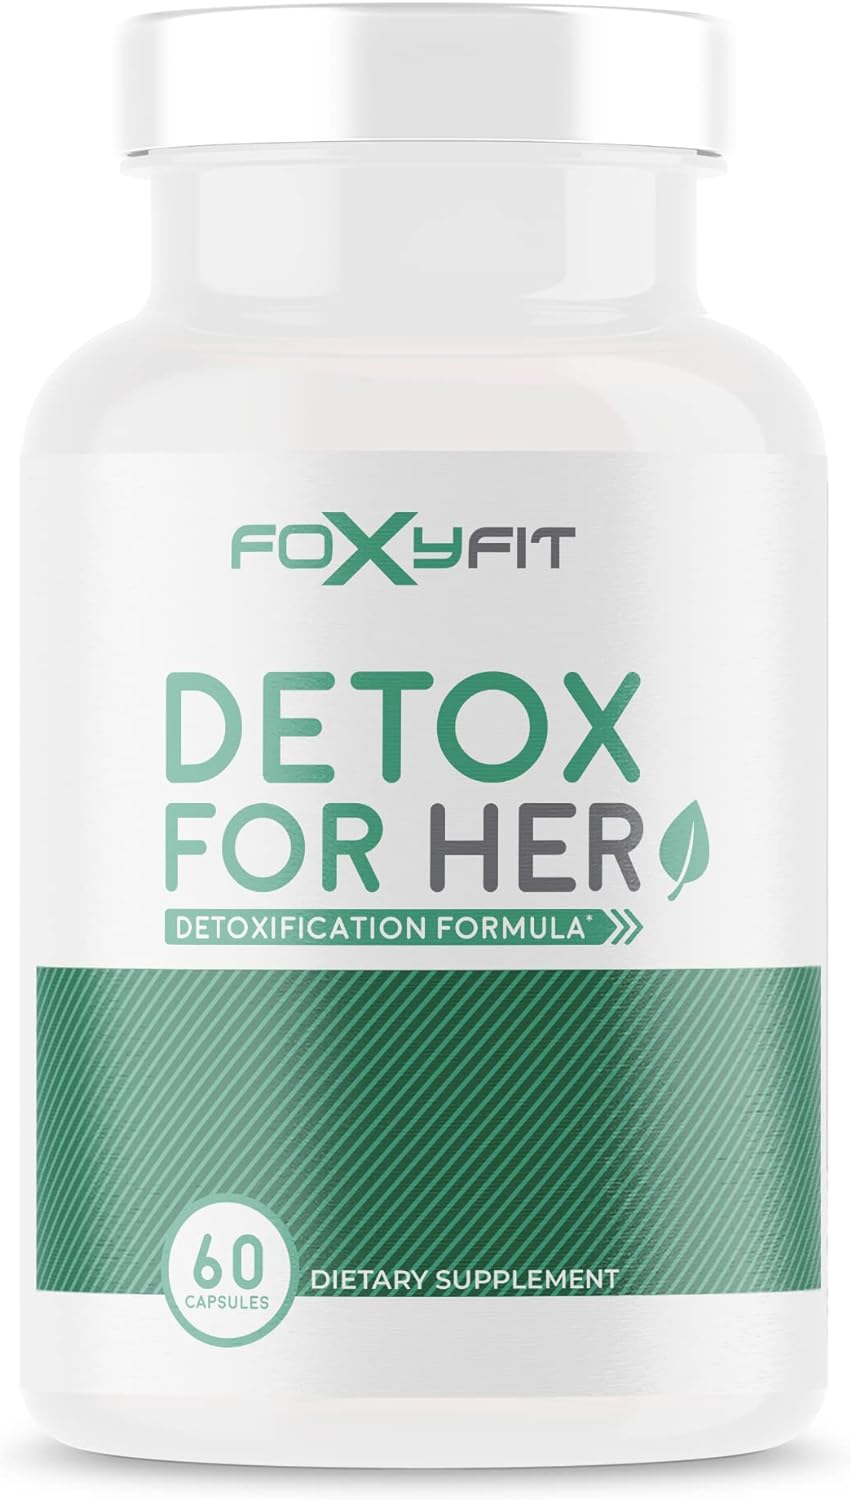 FoxyFit Detox for Her 30 Day Detox Cleanse Formula That Supports Healthy Digestion Function, Promotes Detoxification, & Balances from Within*